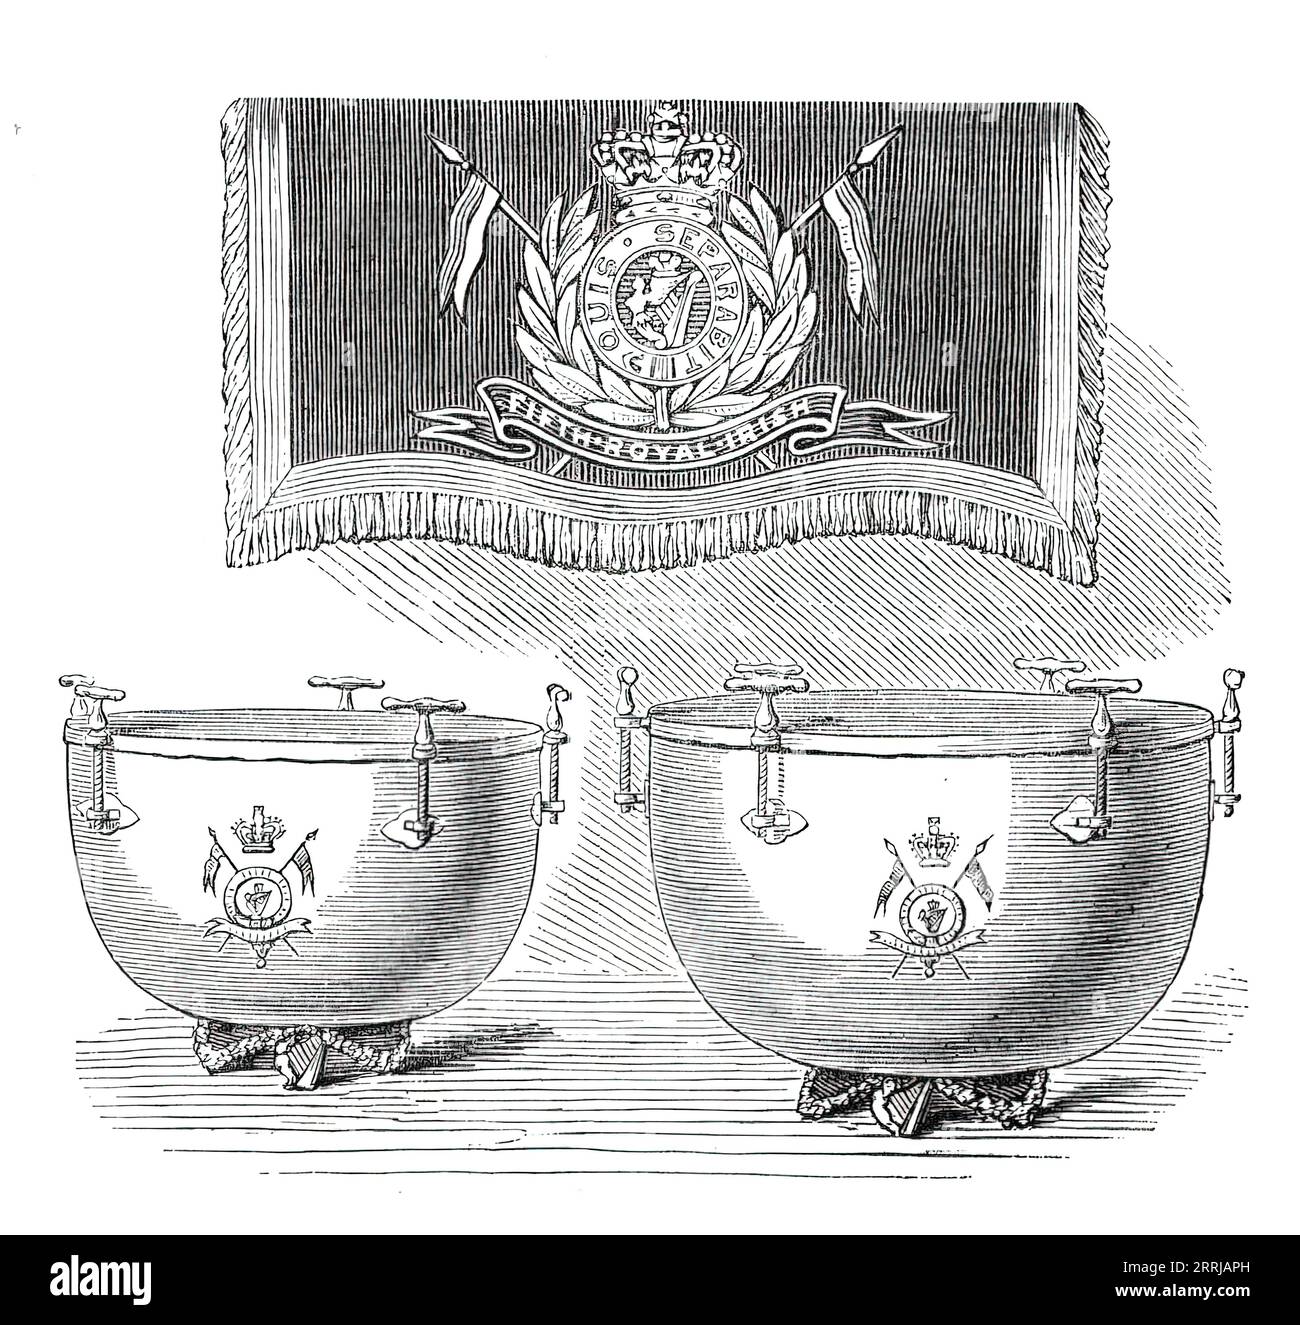 Silver Kettledrums for the 5th Royal Irish Lancers, 1876. '...manufactured to the order of Lieutenant-Colonel Massey, honourably distinguished as &quot;Redan Massey,&quot; by the firm of G. Potter and Co., at Aldershott. They are made in accordance with the latest principles of acoustic art as applied to musical instruments...[They] are intended to replace the former silver drums of the regiment, which were destroyed in the late fire at the Tower of London. They are hammered out of sterling sheet-silver...the &quot;ring&quot; of silver has a peculiar quality in relation to sound...Hence the ad Stock Photo